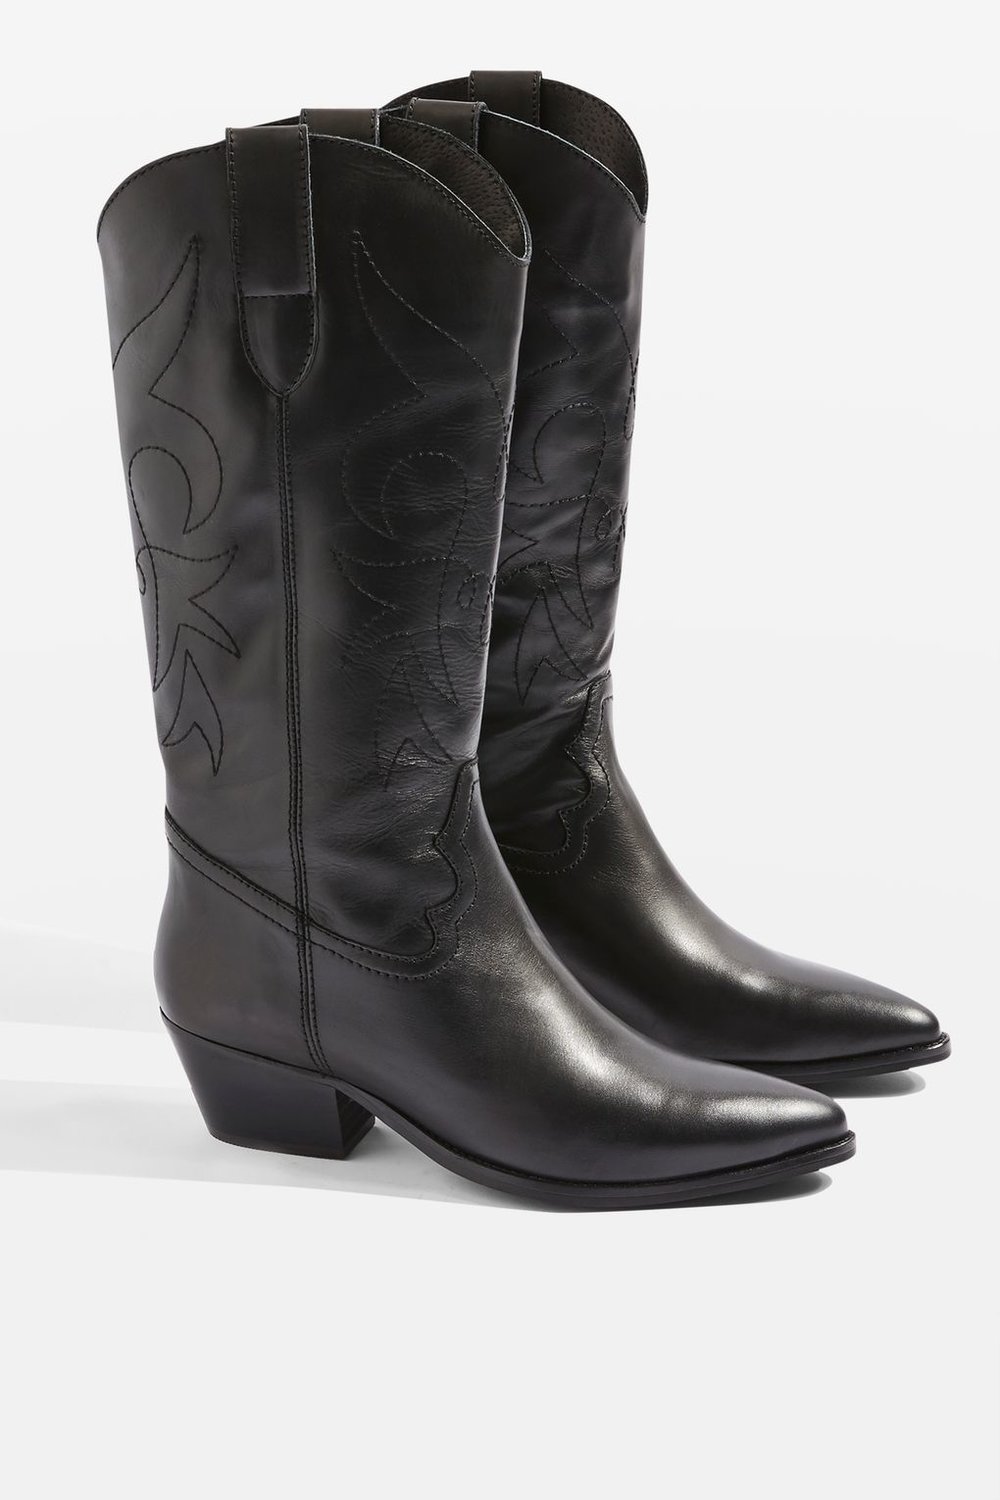 Topshop Devious Western Boot